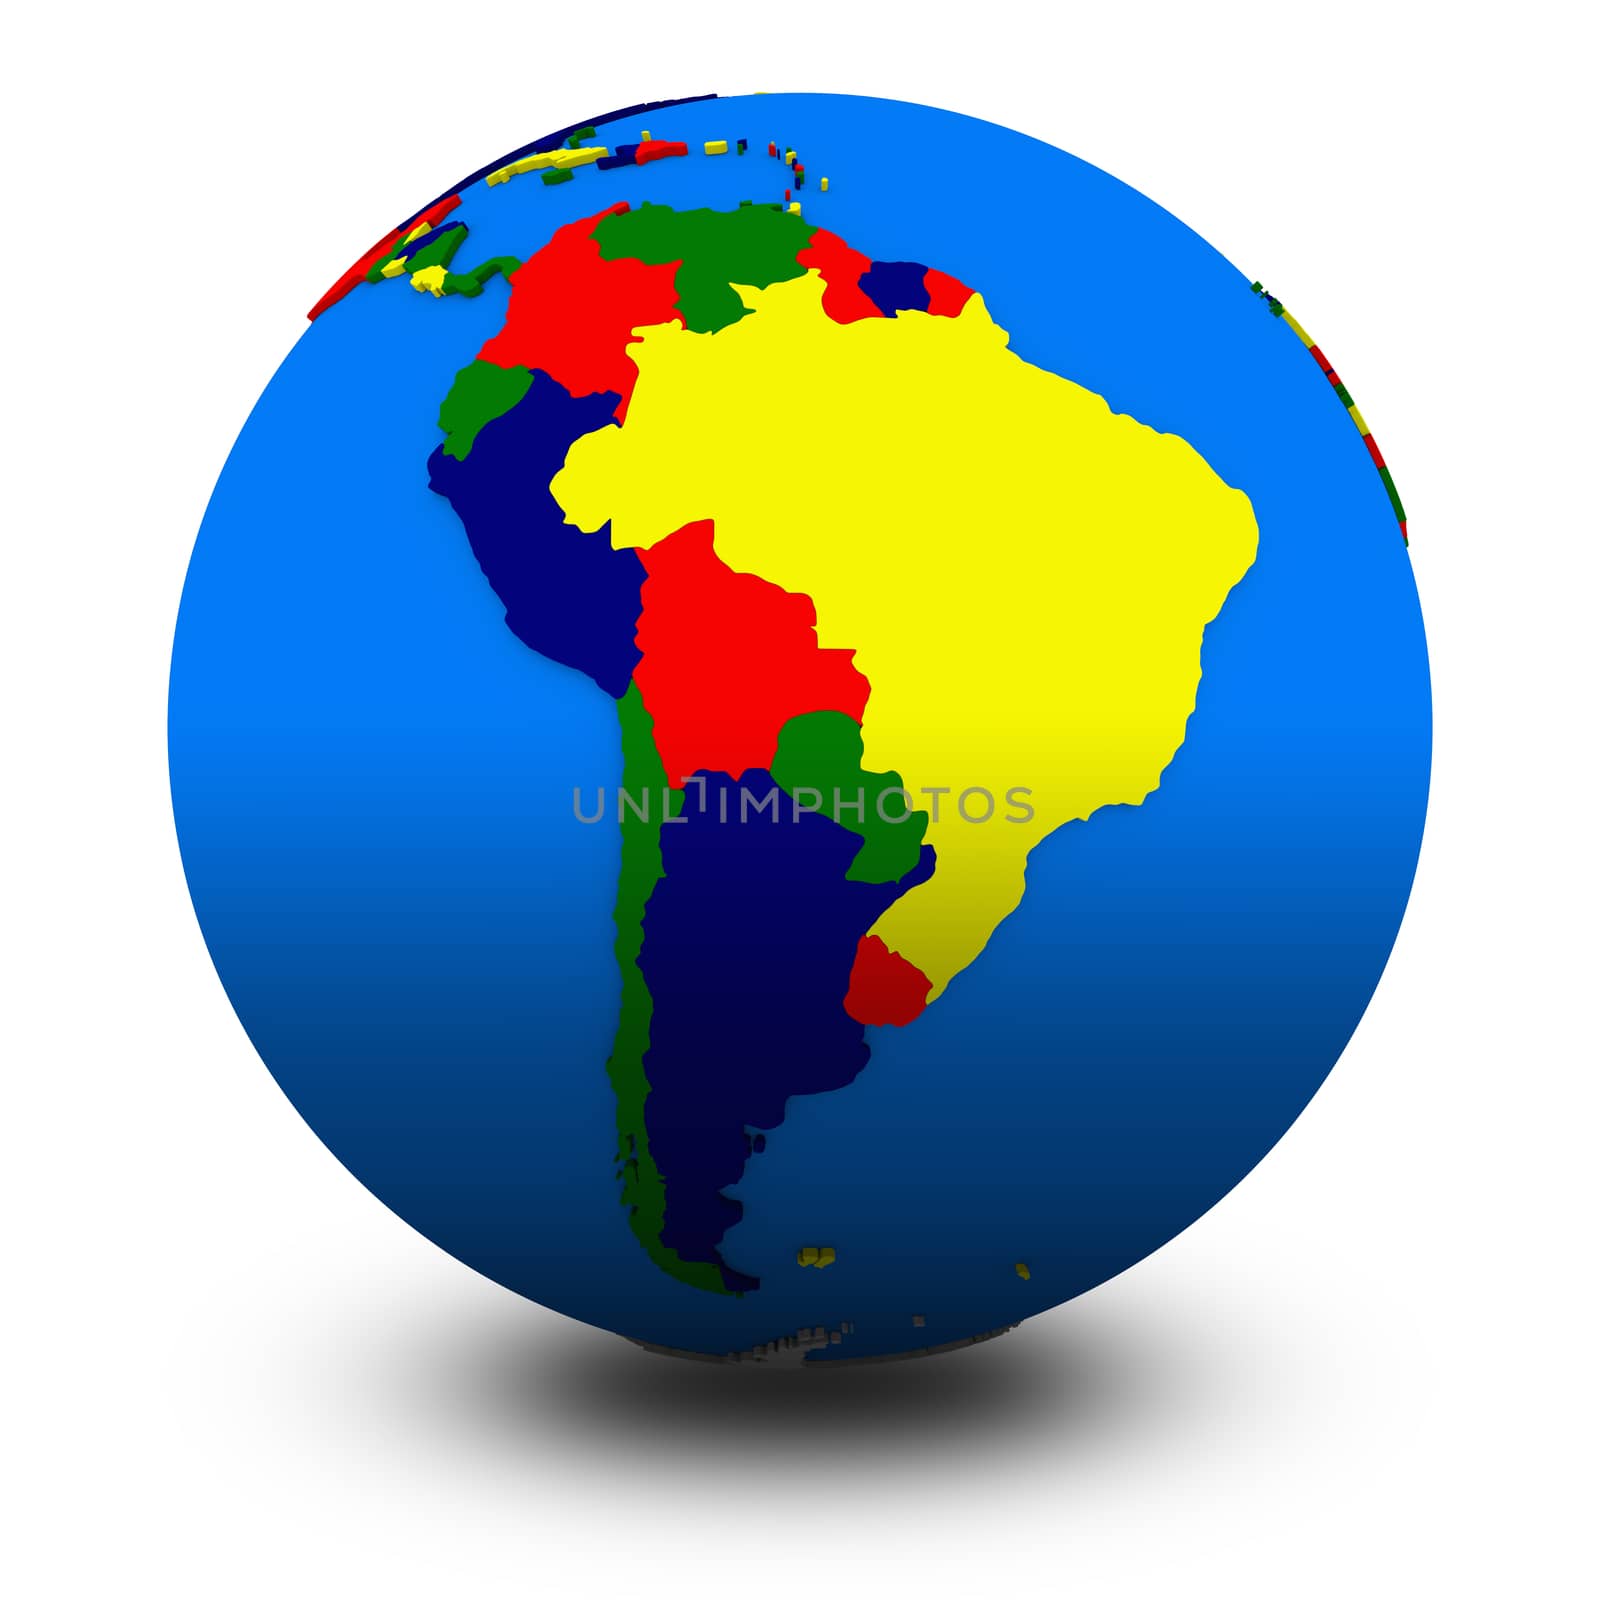 south America on political globe illustration by Harvepino